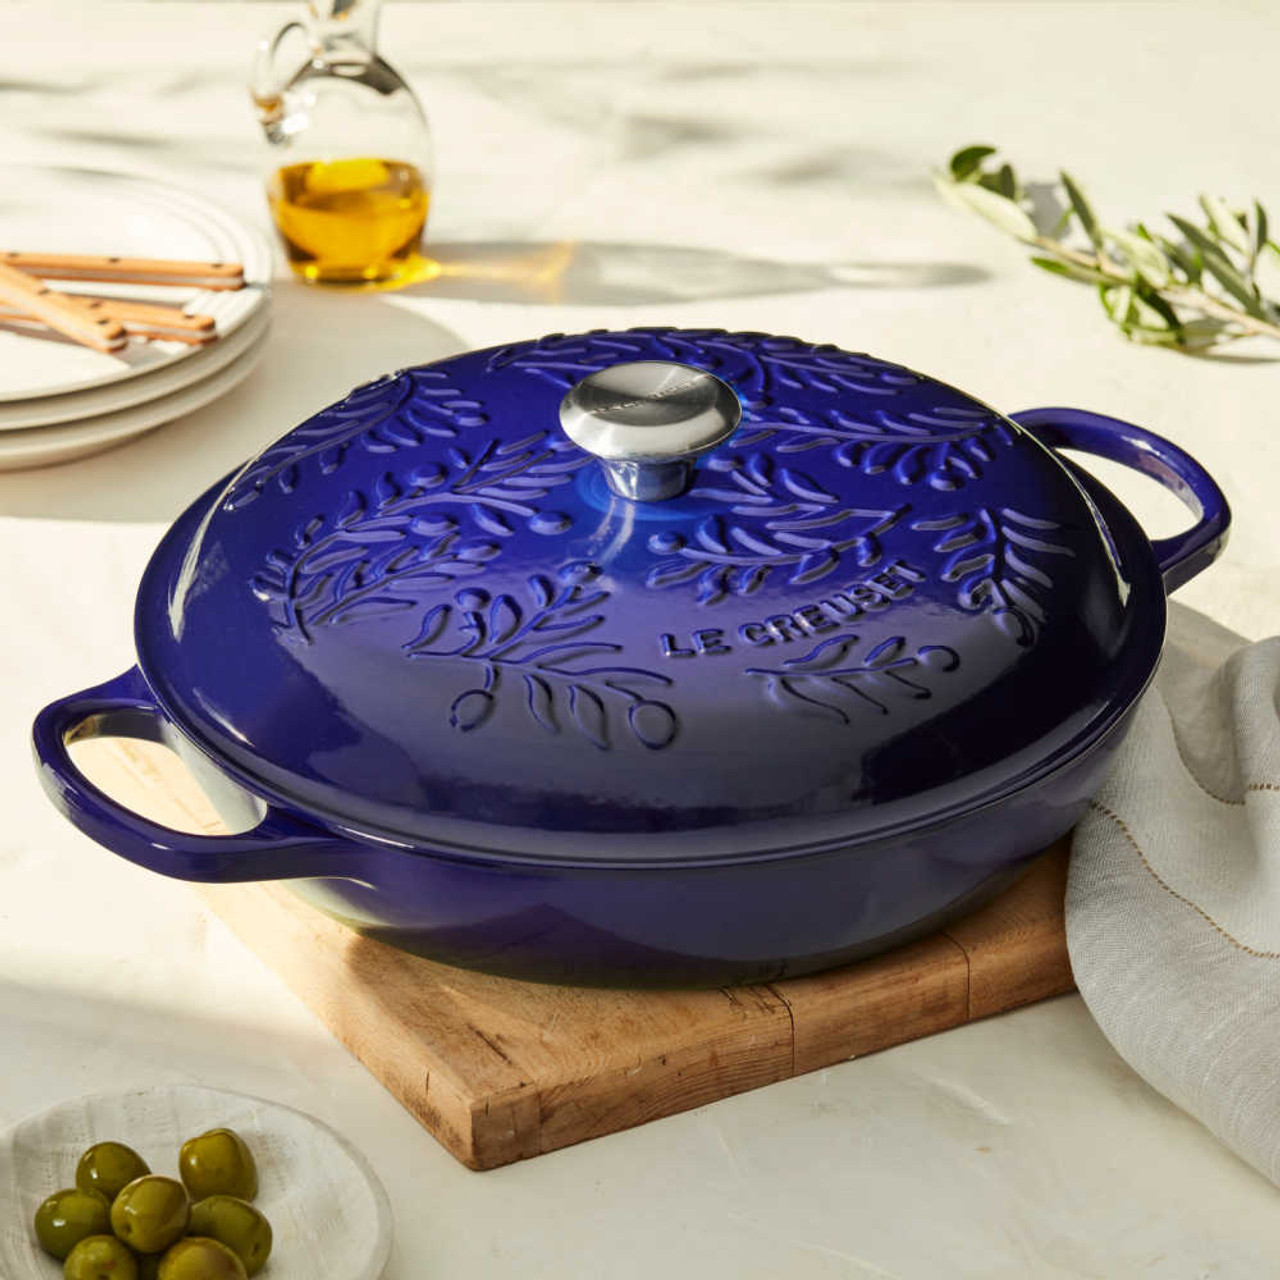 https://cdn11.bigcommerce.com/s-hccytny0od/images/stencil/1280x1280/products/4936/20947/Le_Creuset_Olive_Branch_Collection_Braiser_in_Indigo_1__24771.1659491172.jpg?c=2?imbypass=on